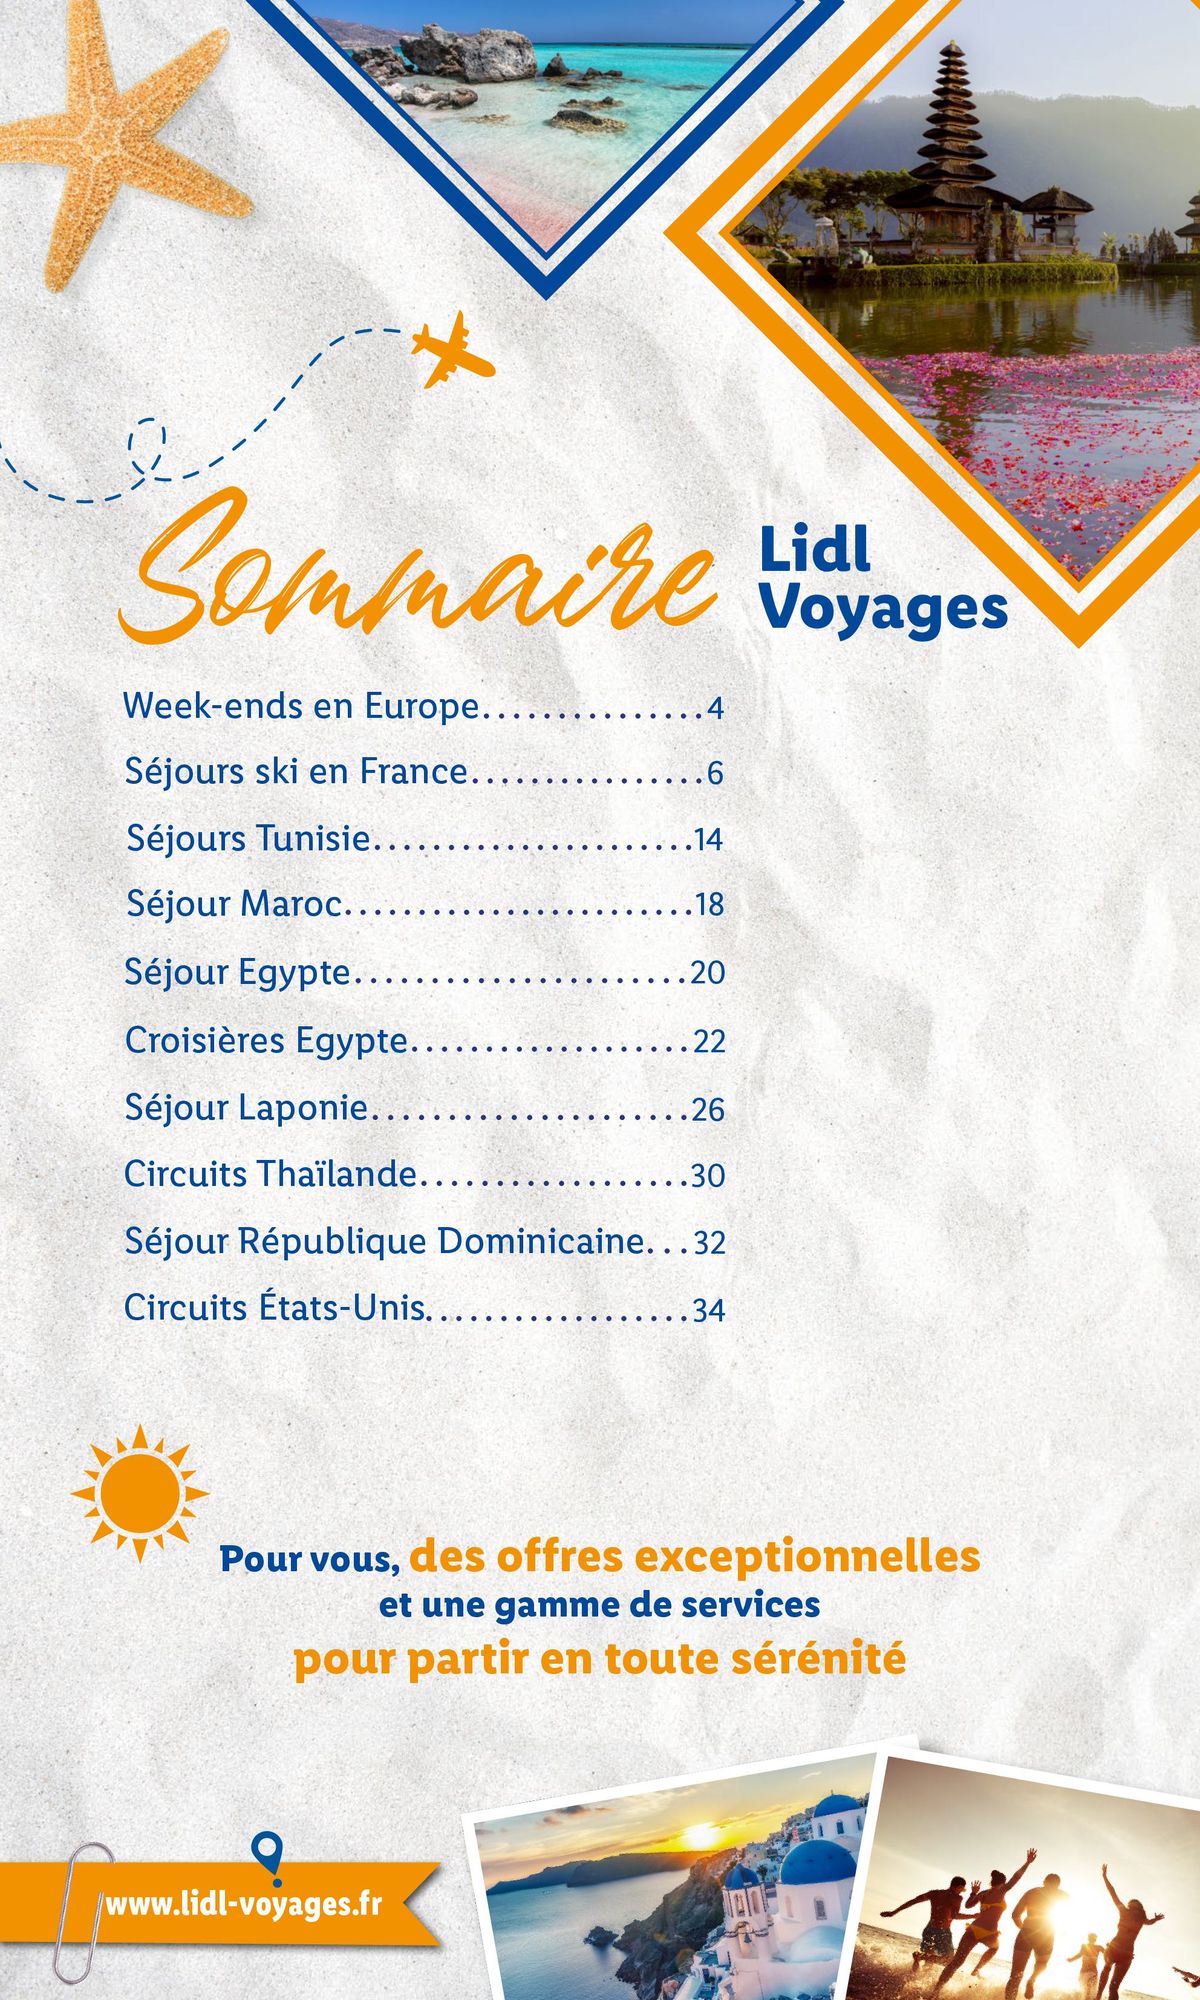 Catalogue Lidl-Voyages, page 00002